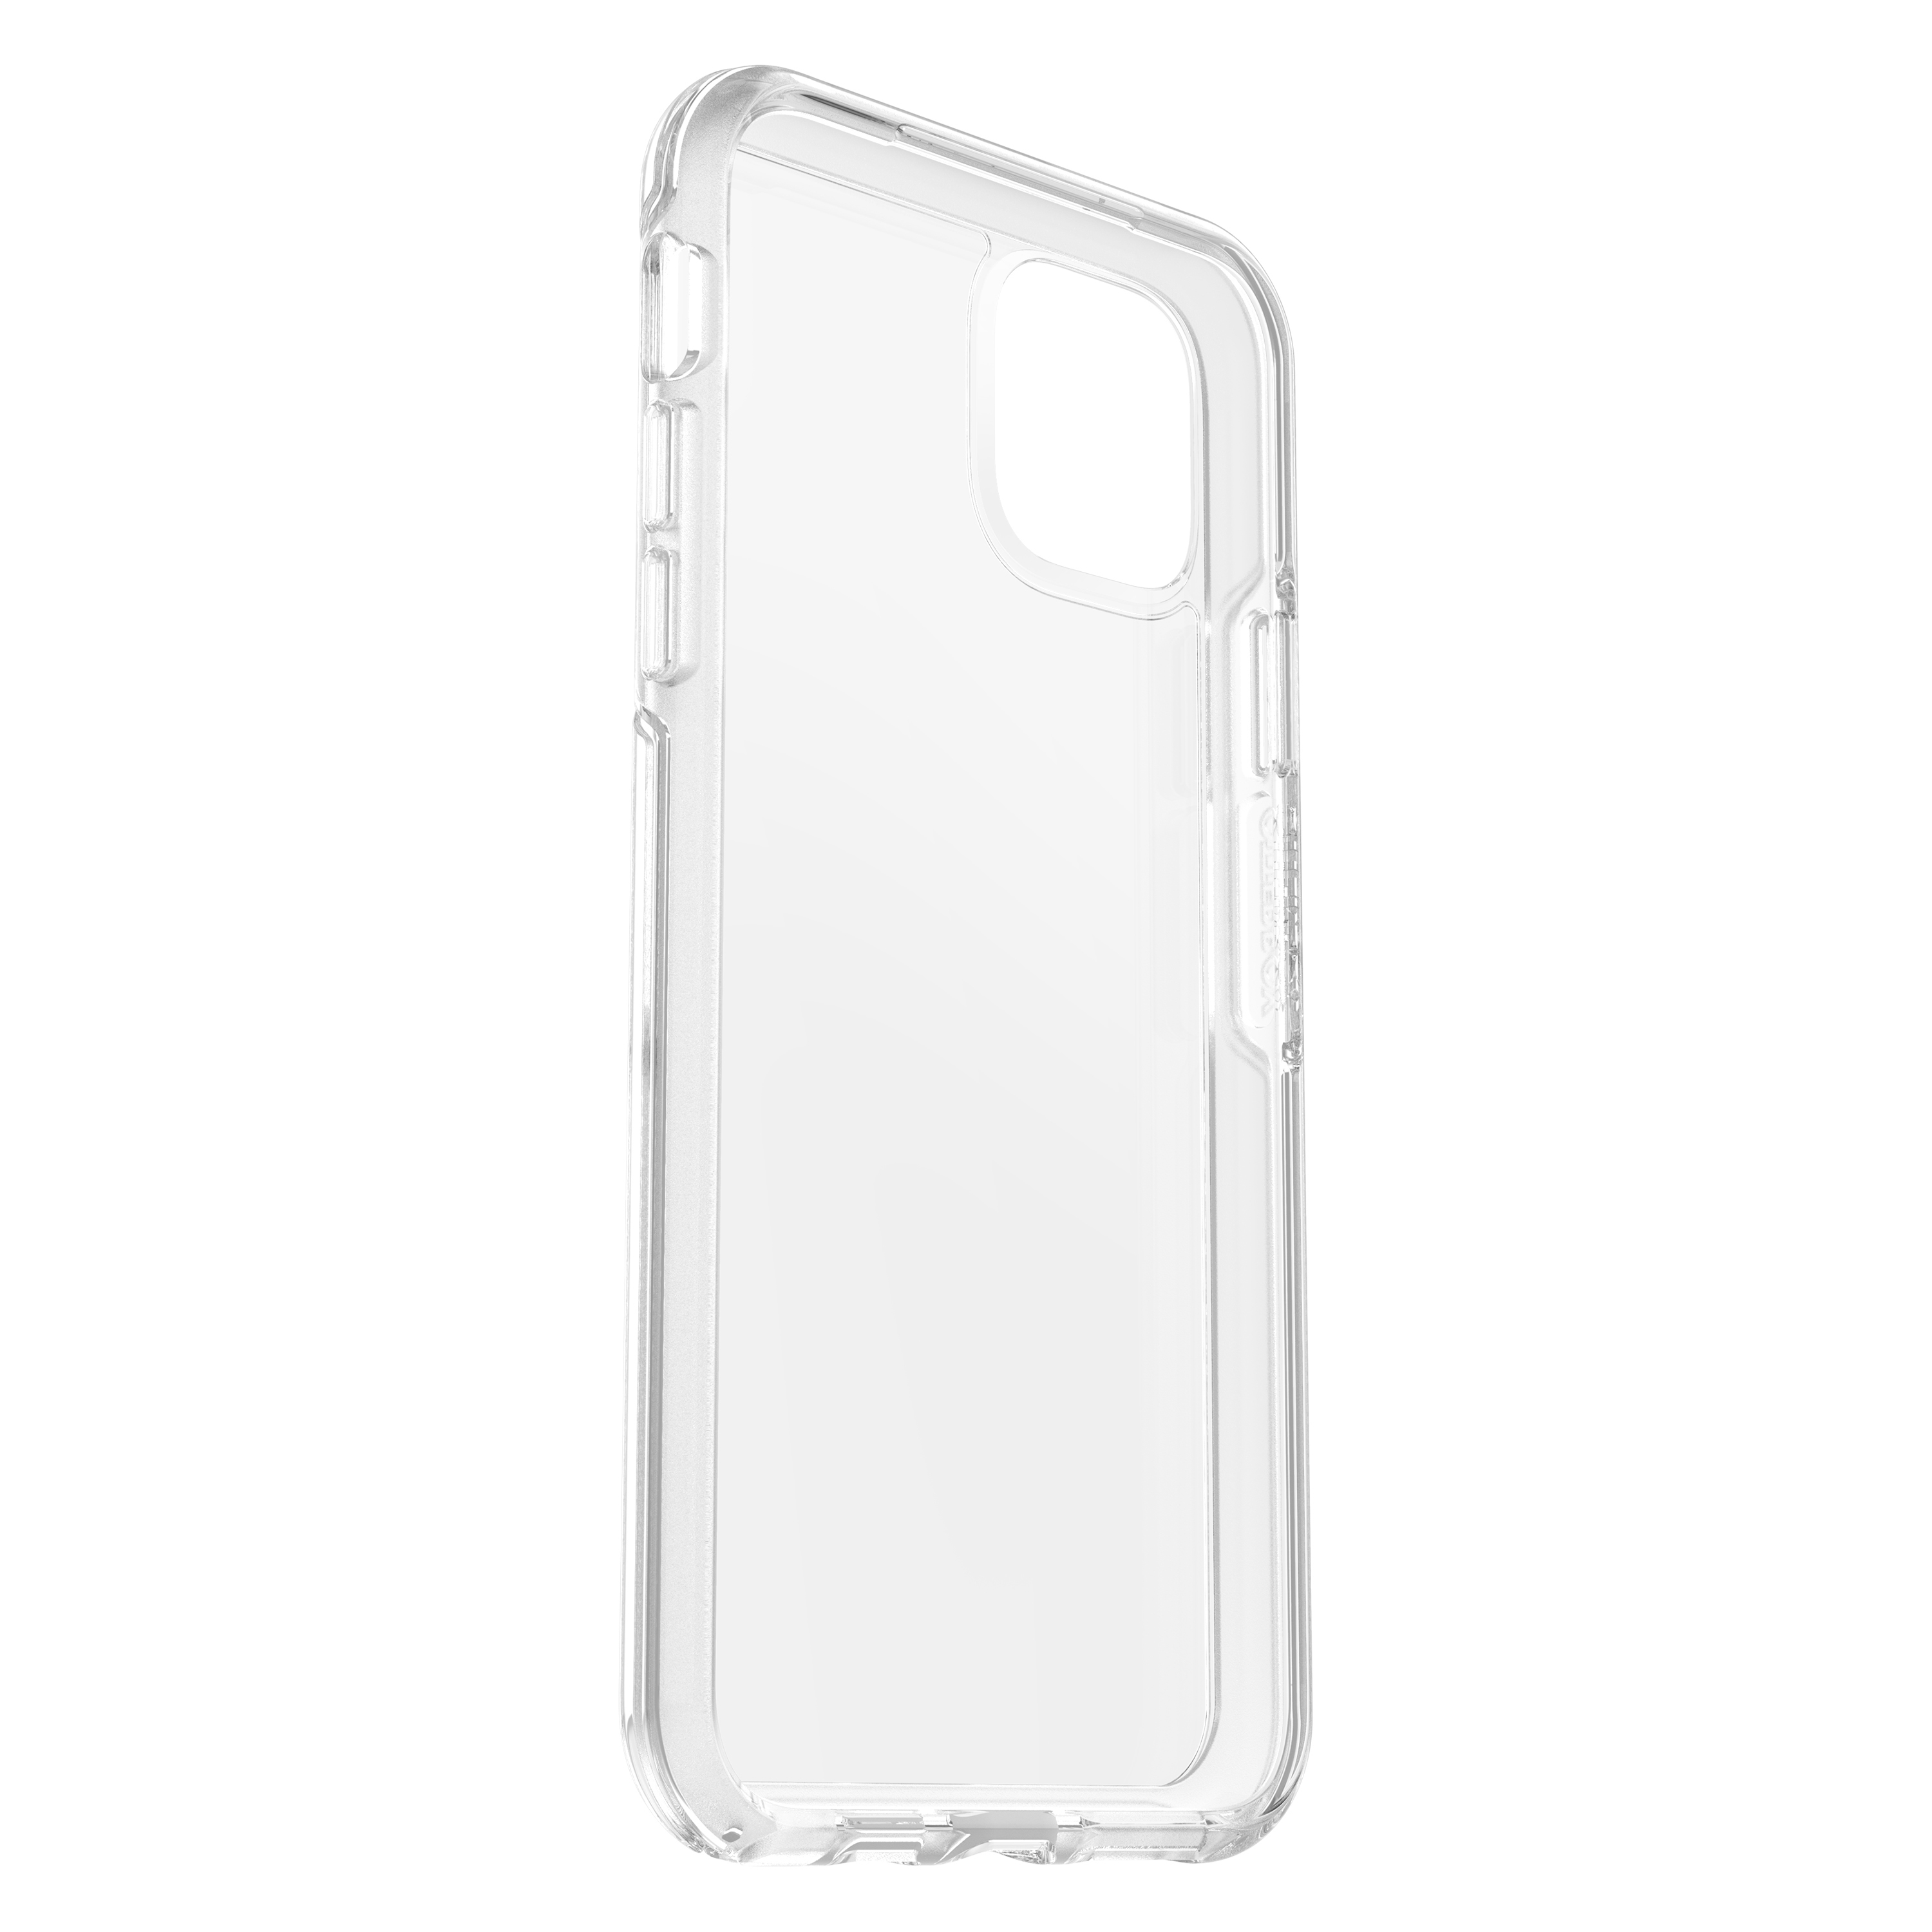 OTTERBOX Symmetry Max, Pro Apple, iPhone Clear, Transparent 11 Backcover